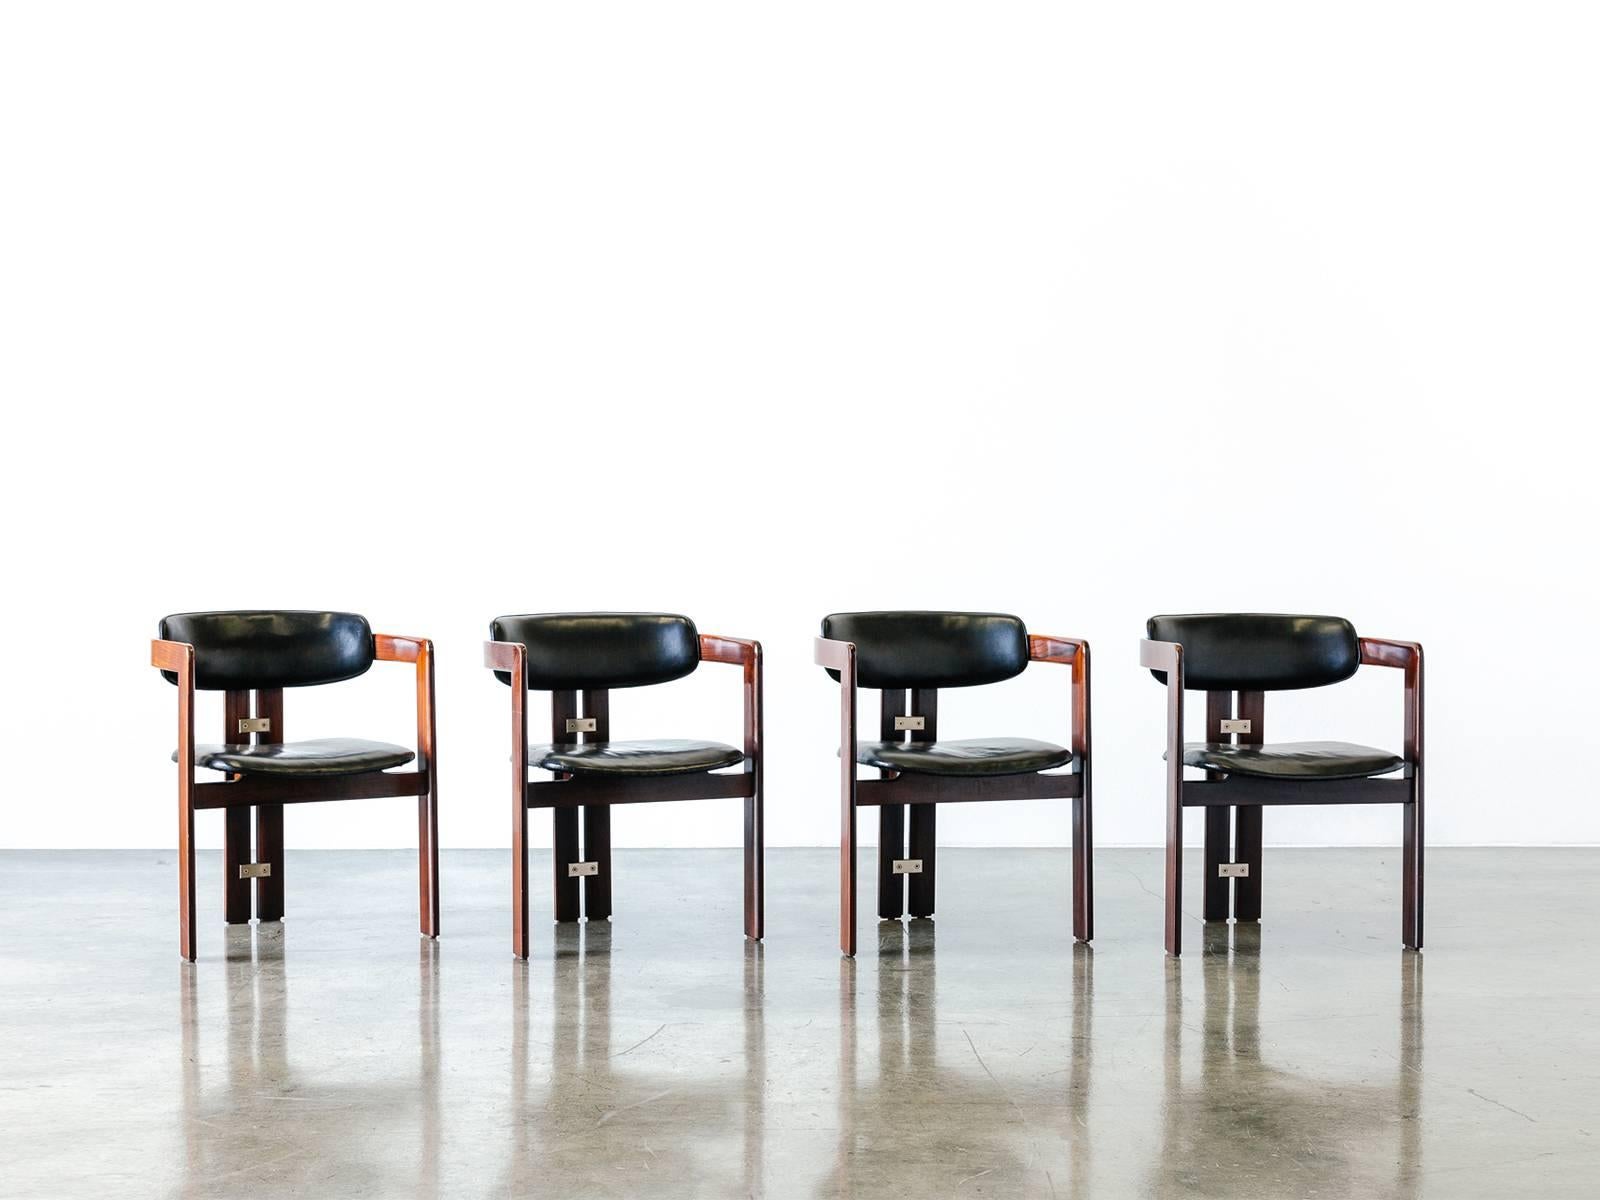 Stately set of four armchairs made from varnished solid rosewood designed by Augusto Savini for Pozzi in 1965. The arms of the chair flow around and down the back to provide structural support. Small, well-crafted aluminum fittings join the